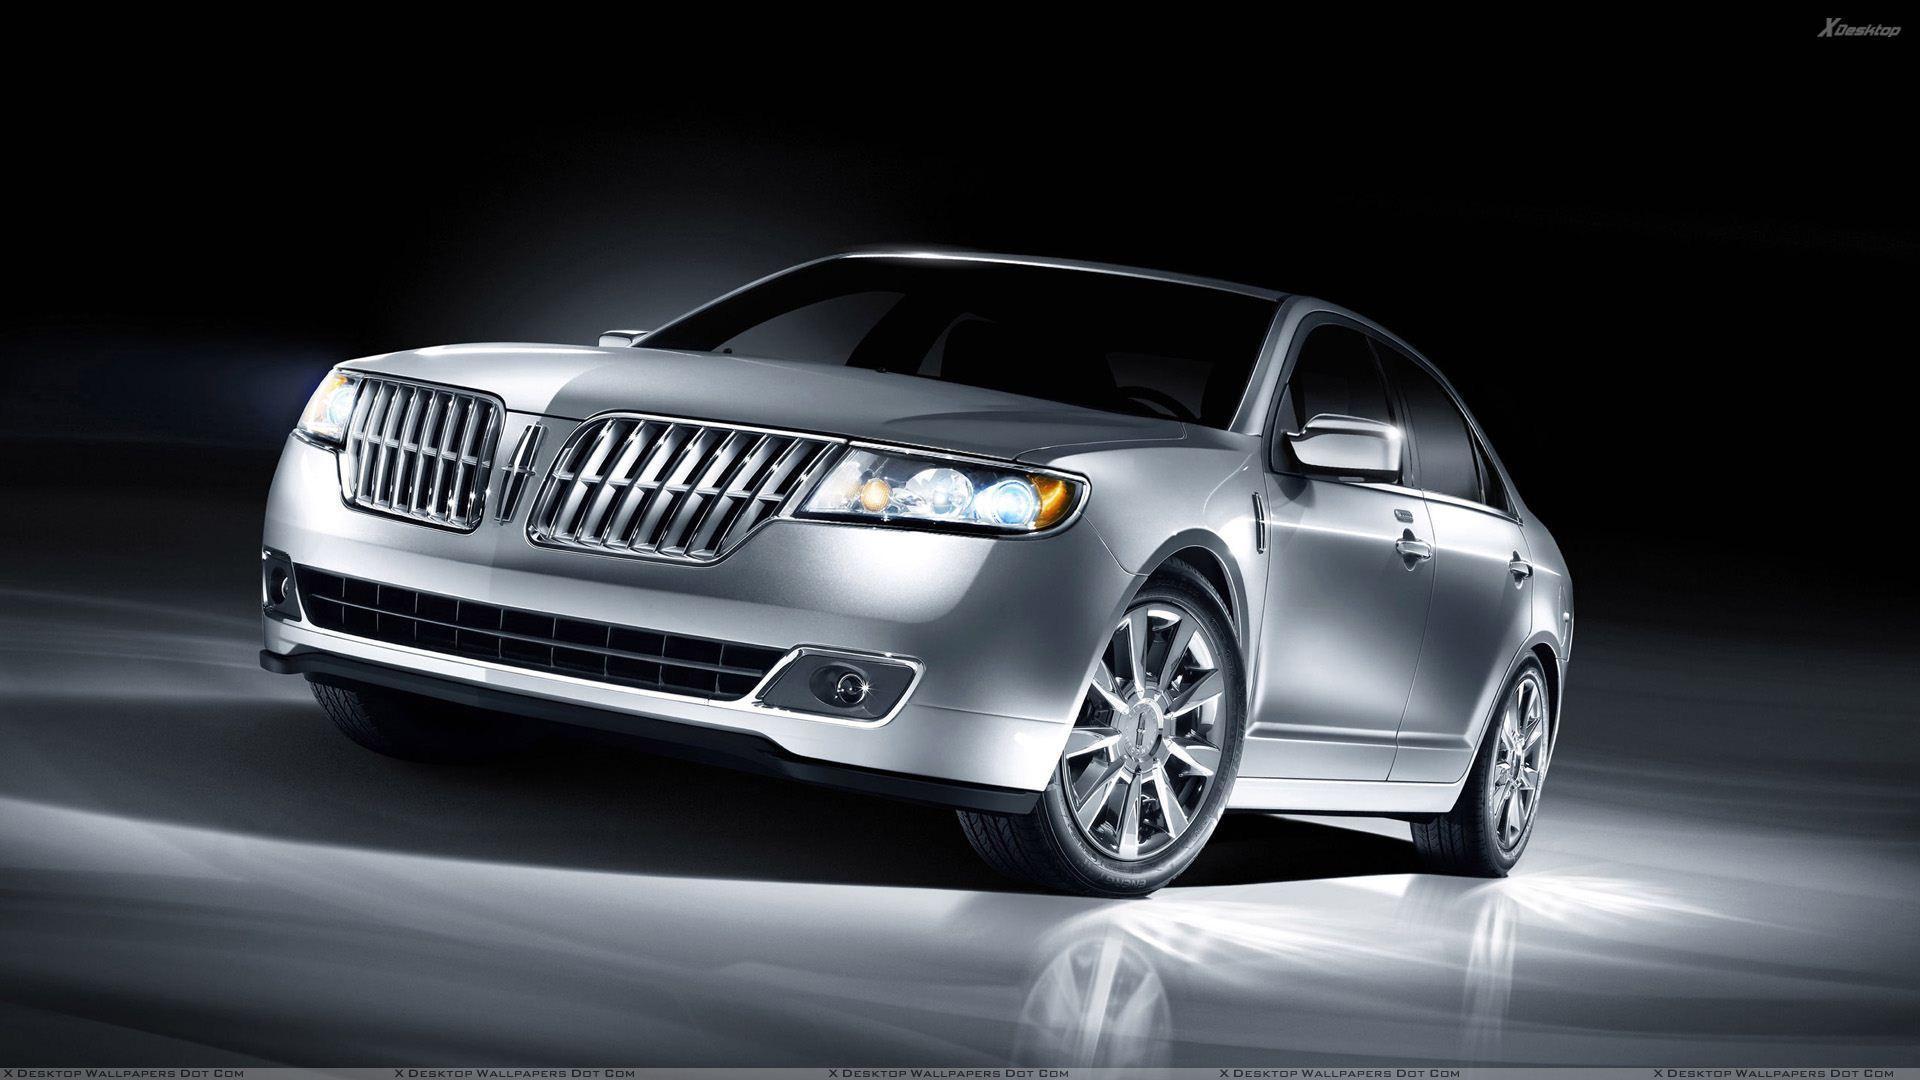 Lincoln MKZ Wallpaper, Photo & Image in HD